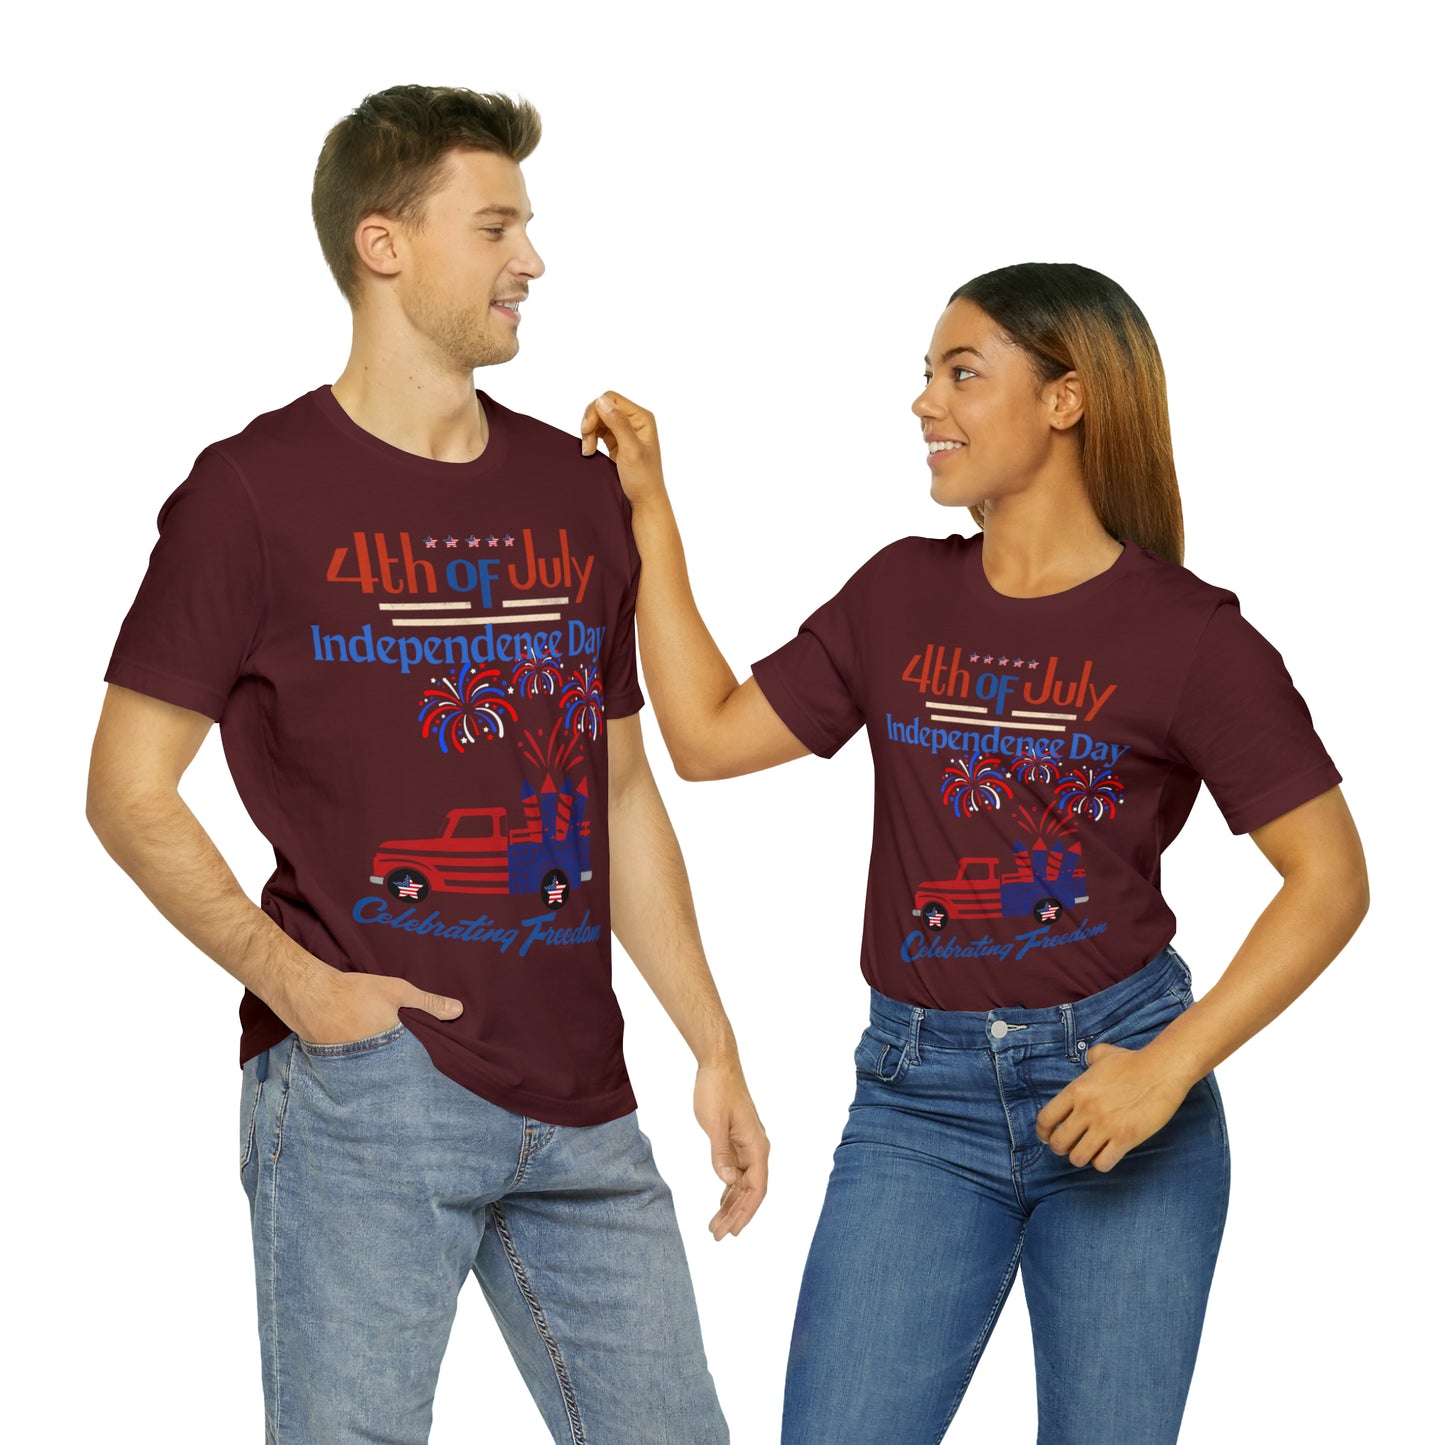 Celebrate Independence with our Patriotic Freedom Shirt! Men and Women's 4th of July Shirt featuring USA Flag, Fireworks, and Joyful Spirit!"